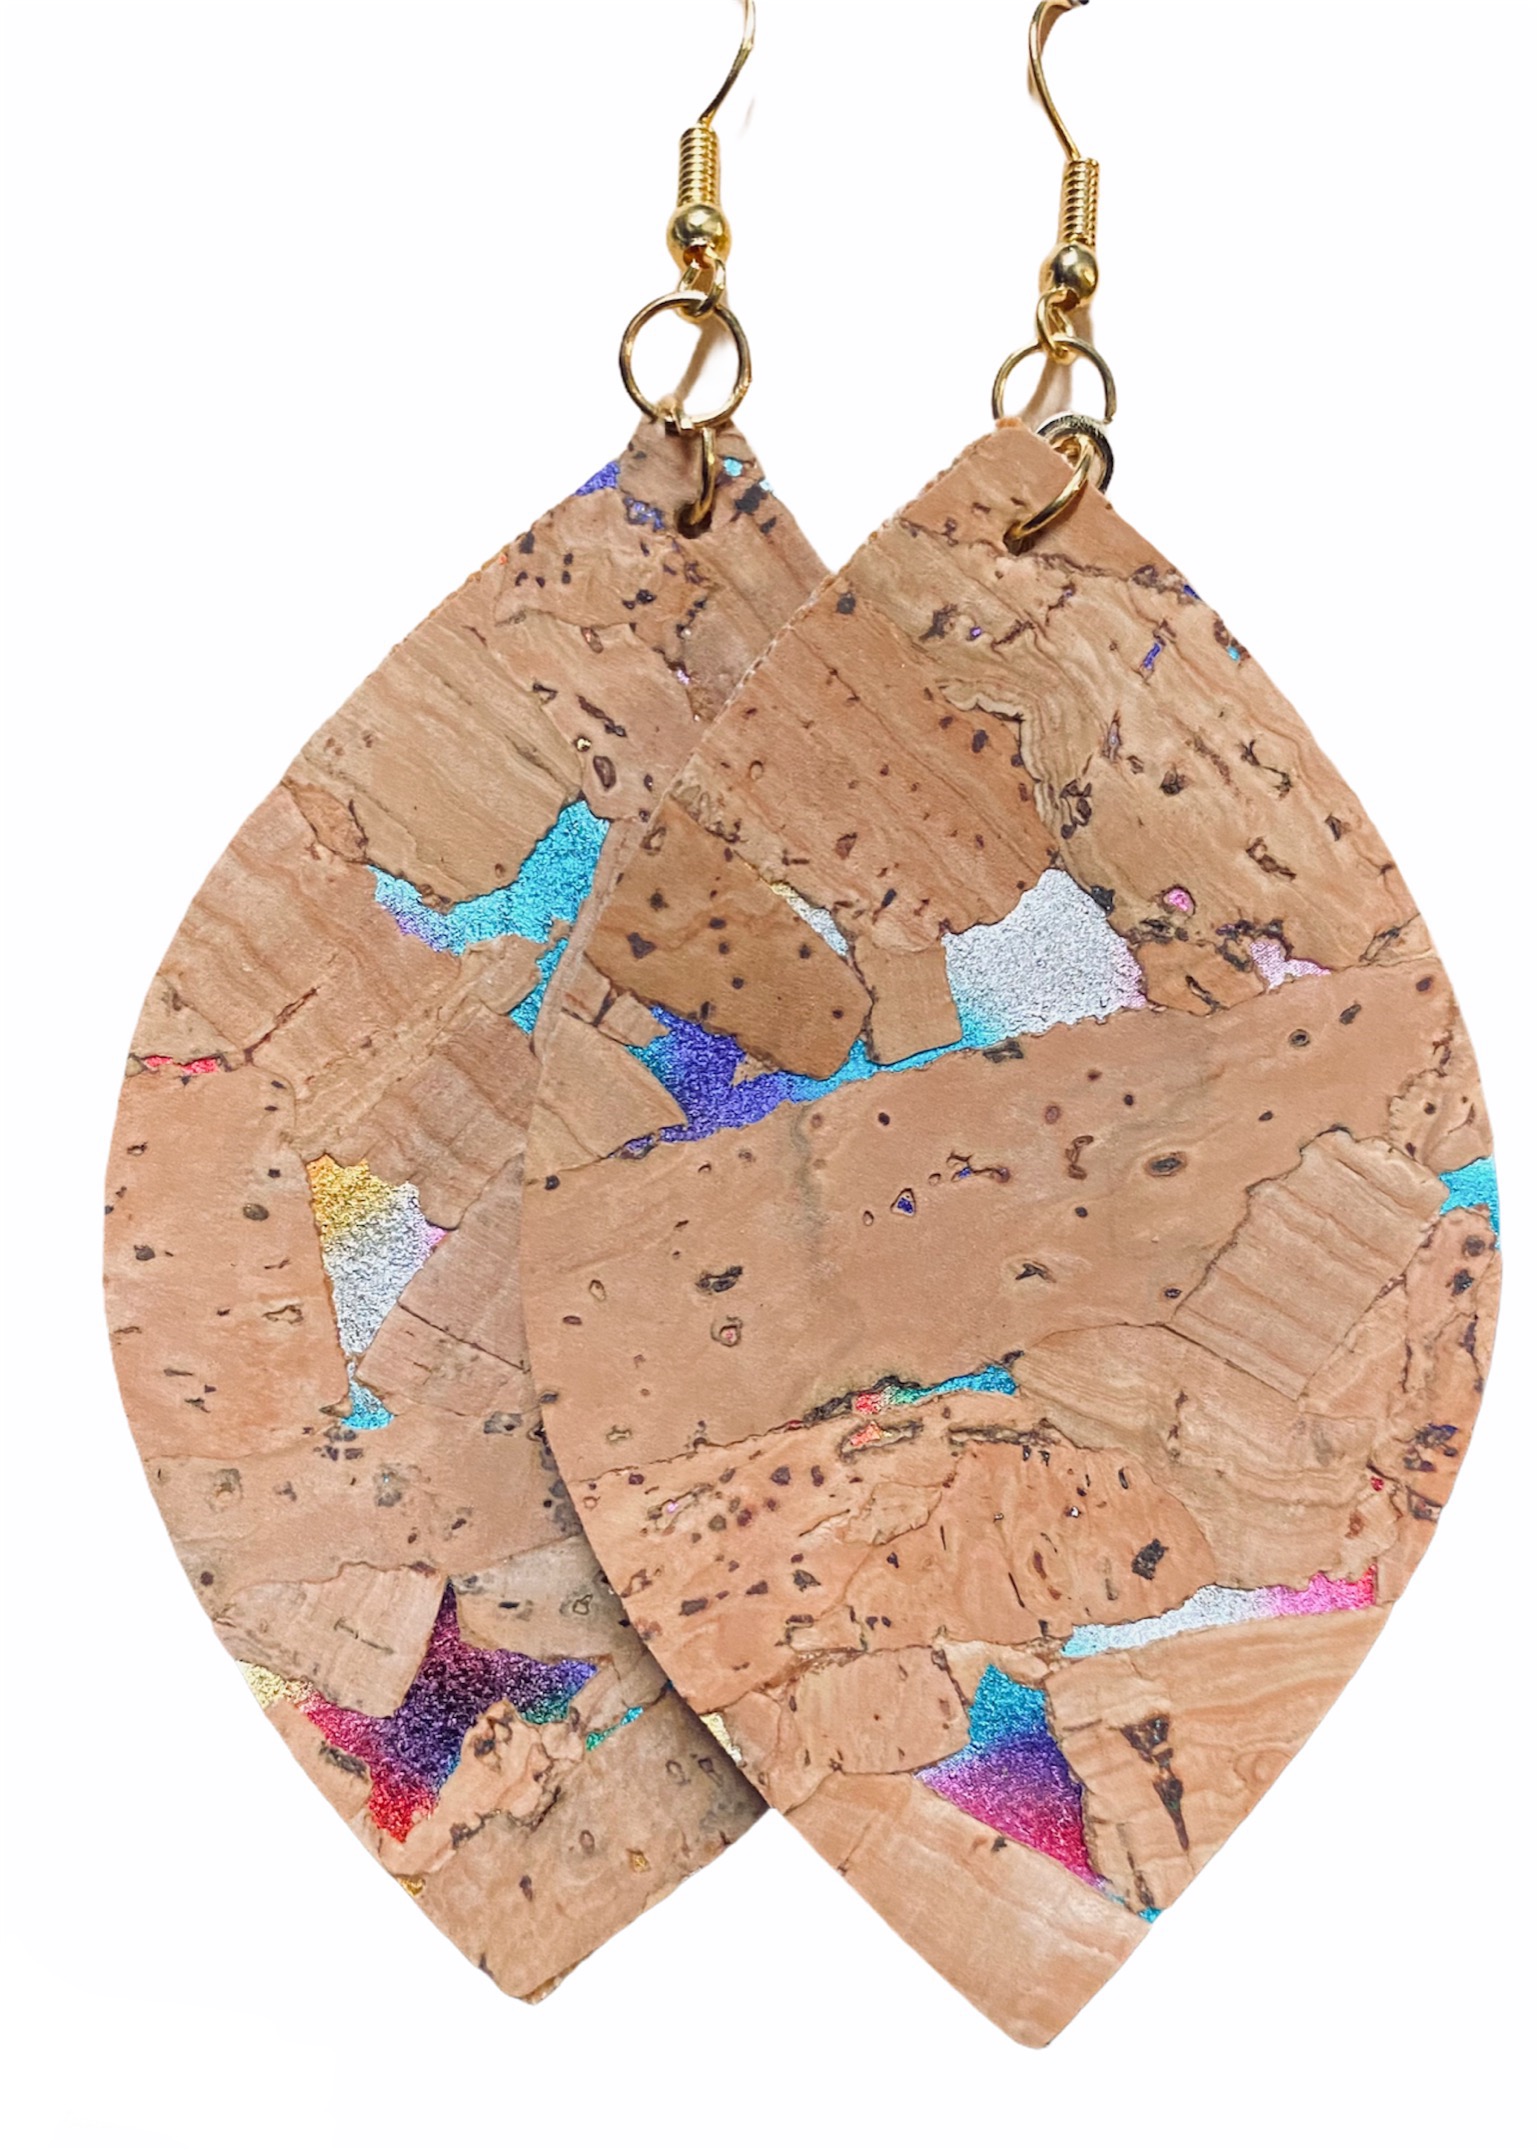 Cork Earrings Natural Cork and Leather Squared Patterned Earrings Leather Earrings